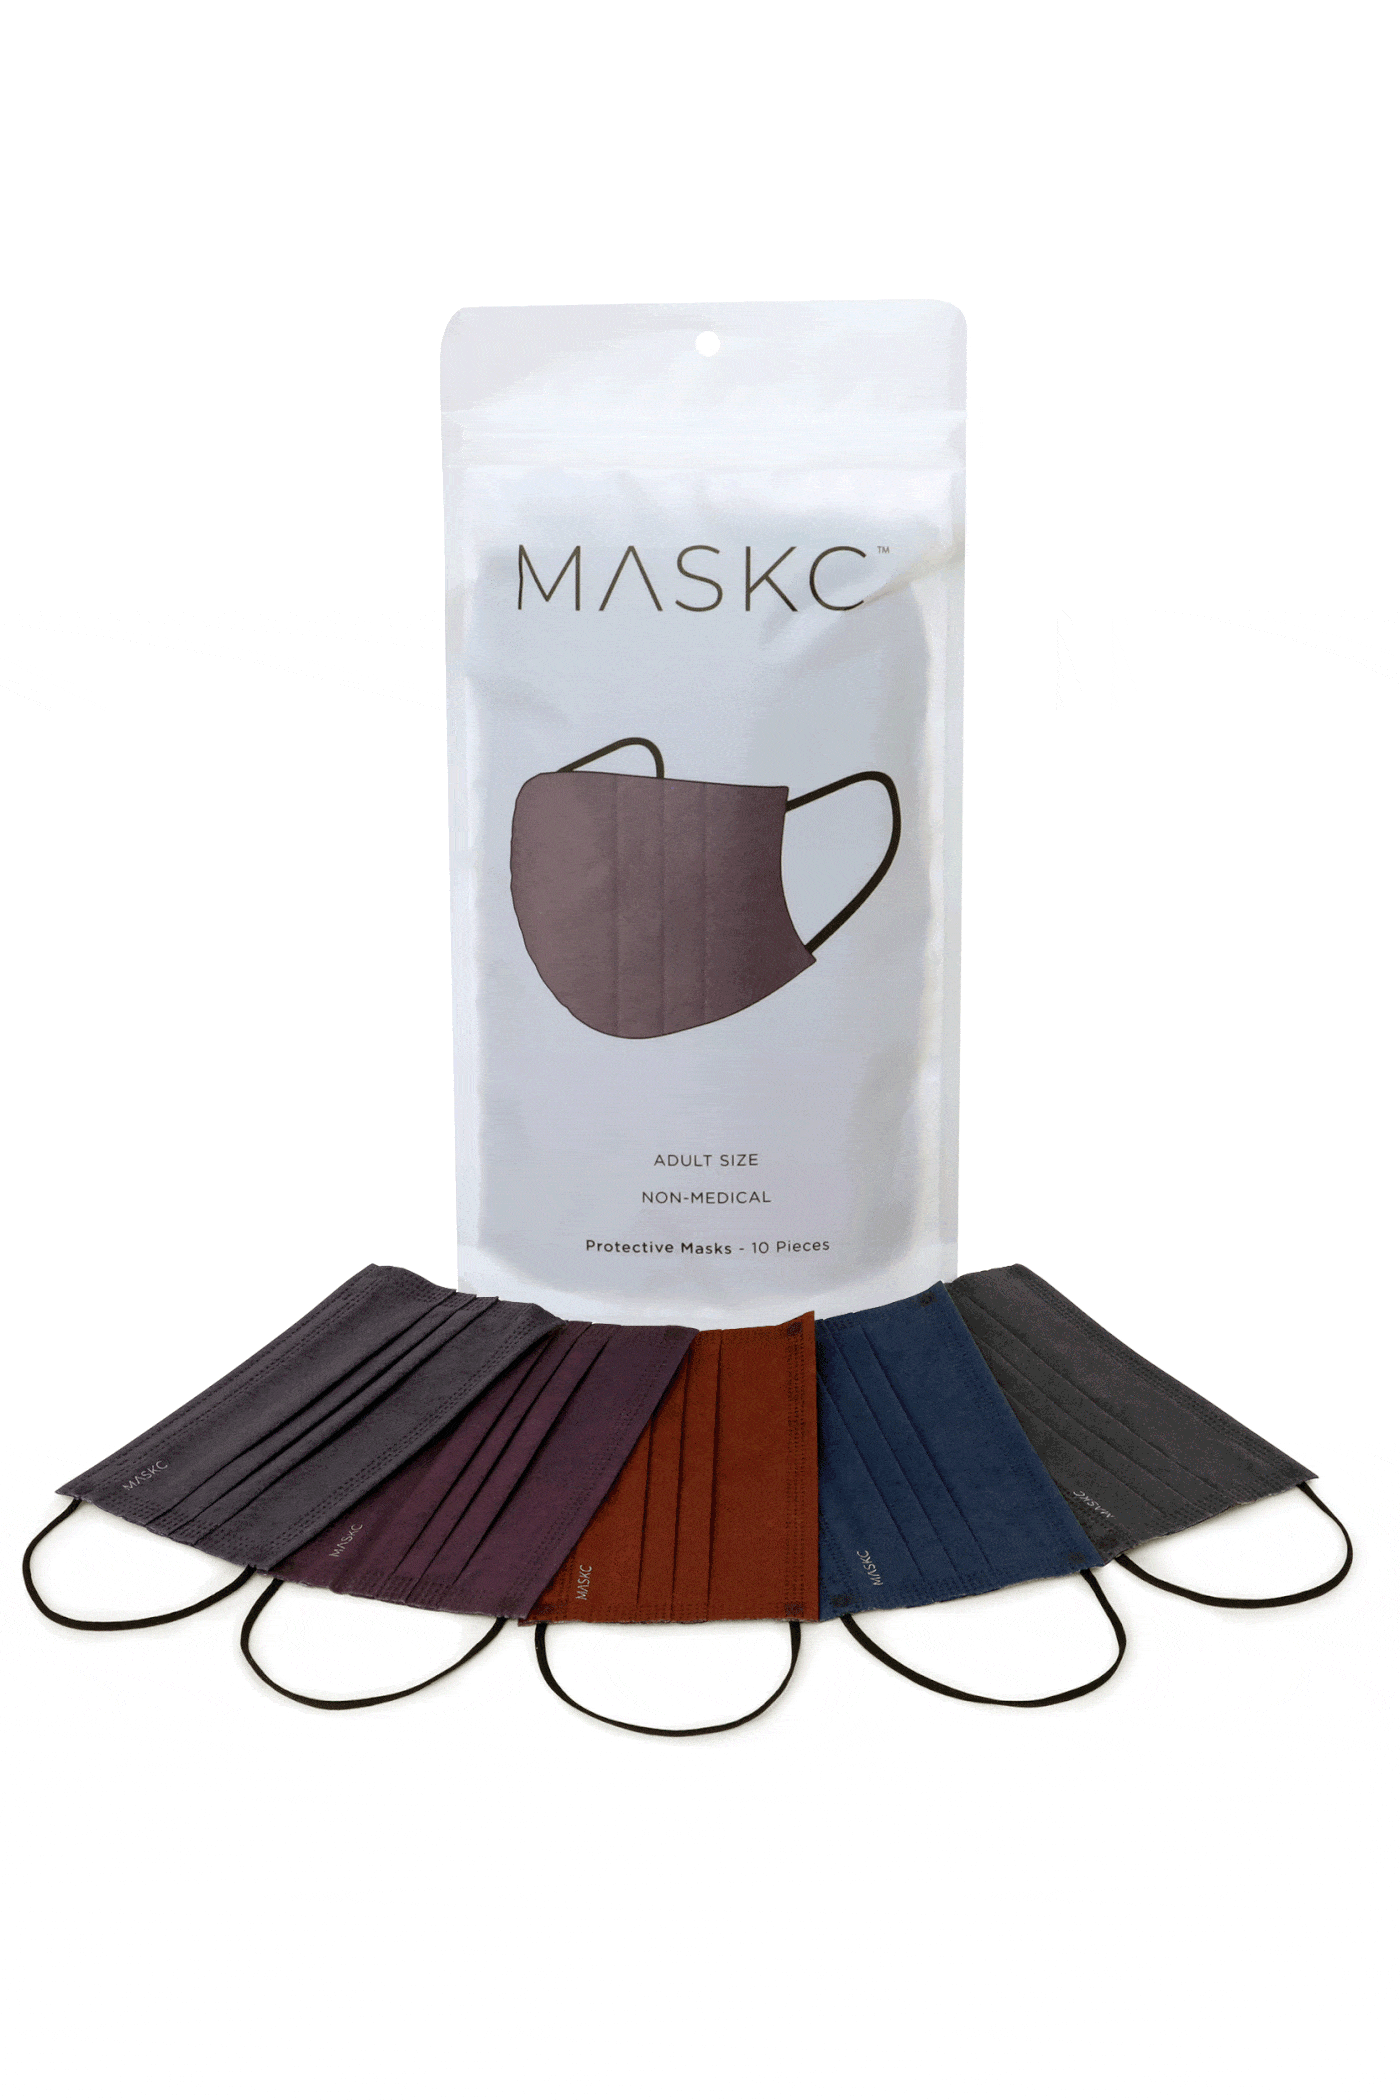 Pack of Jewel Toned Variety face masks. Each pack contains stylish high quality face masks. 